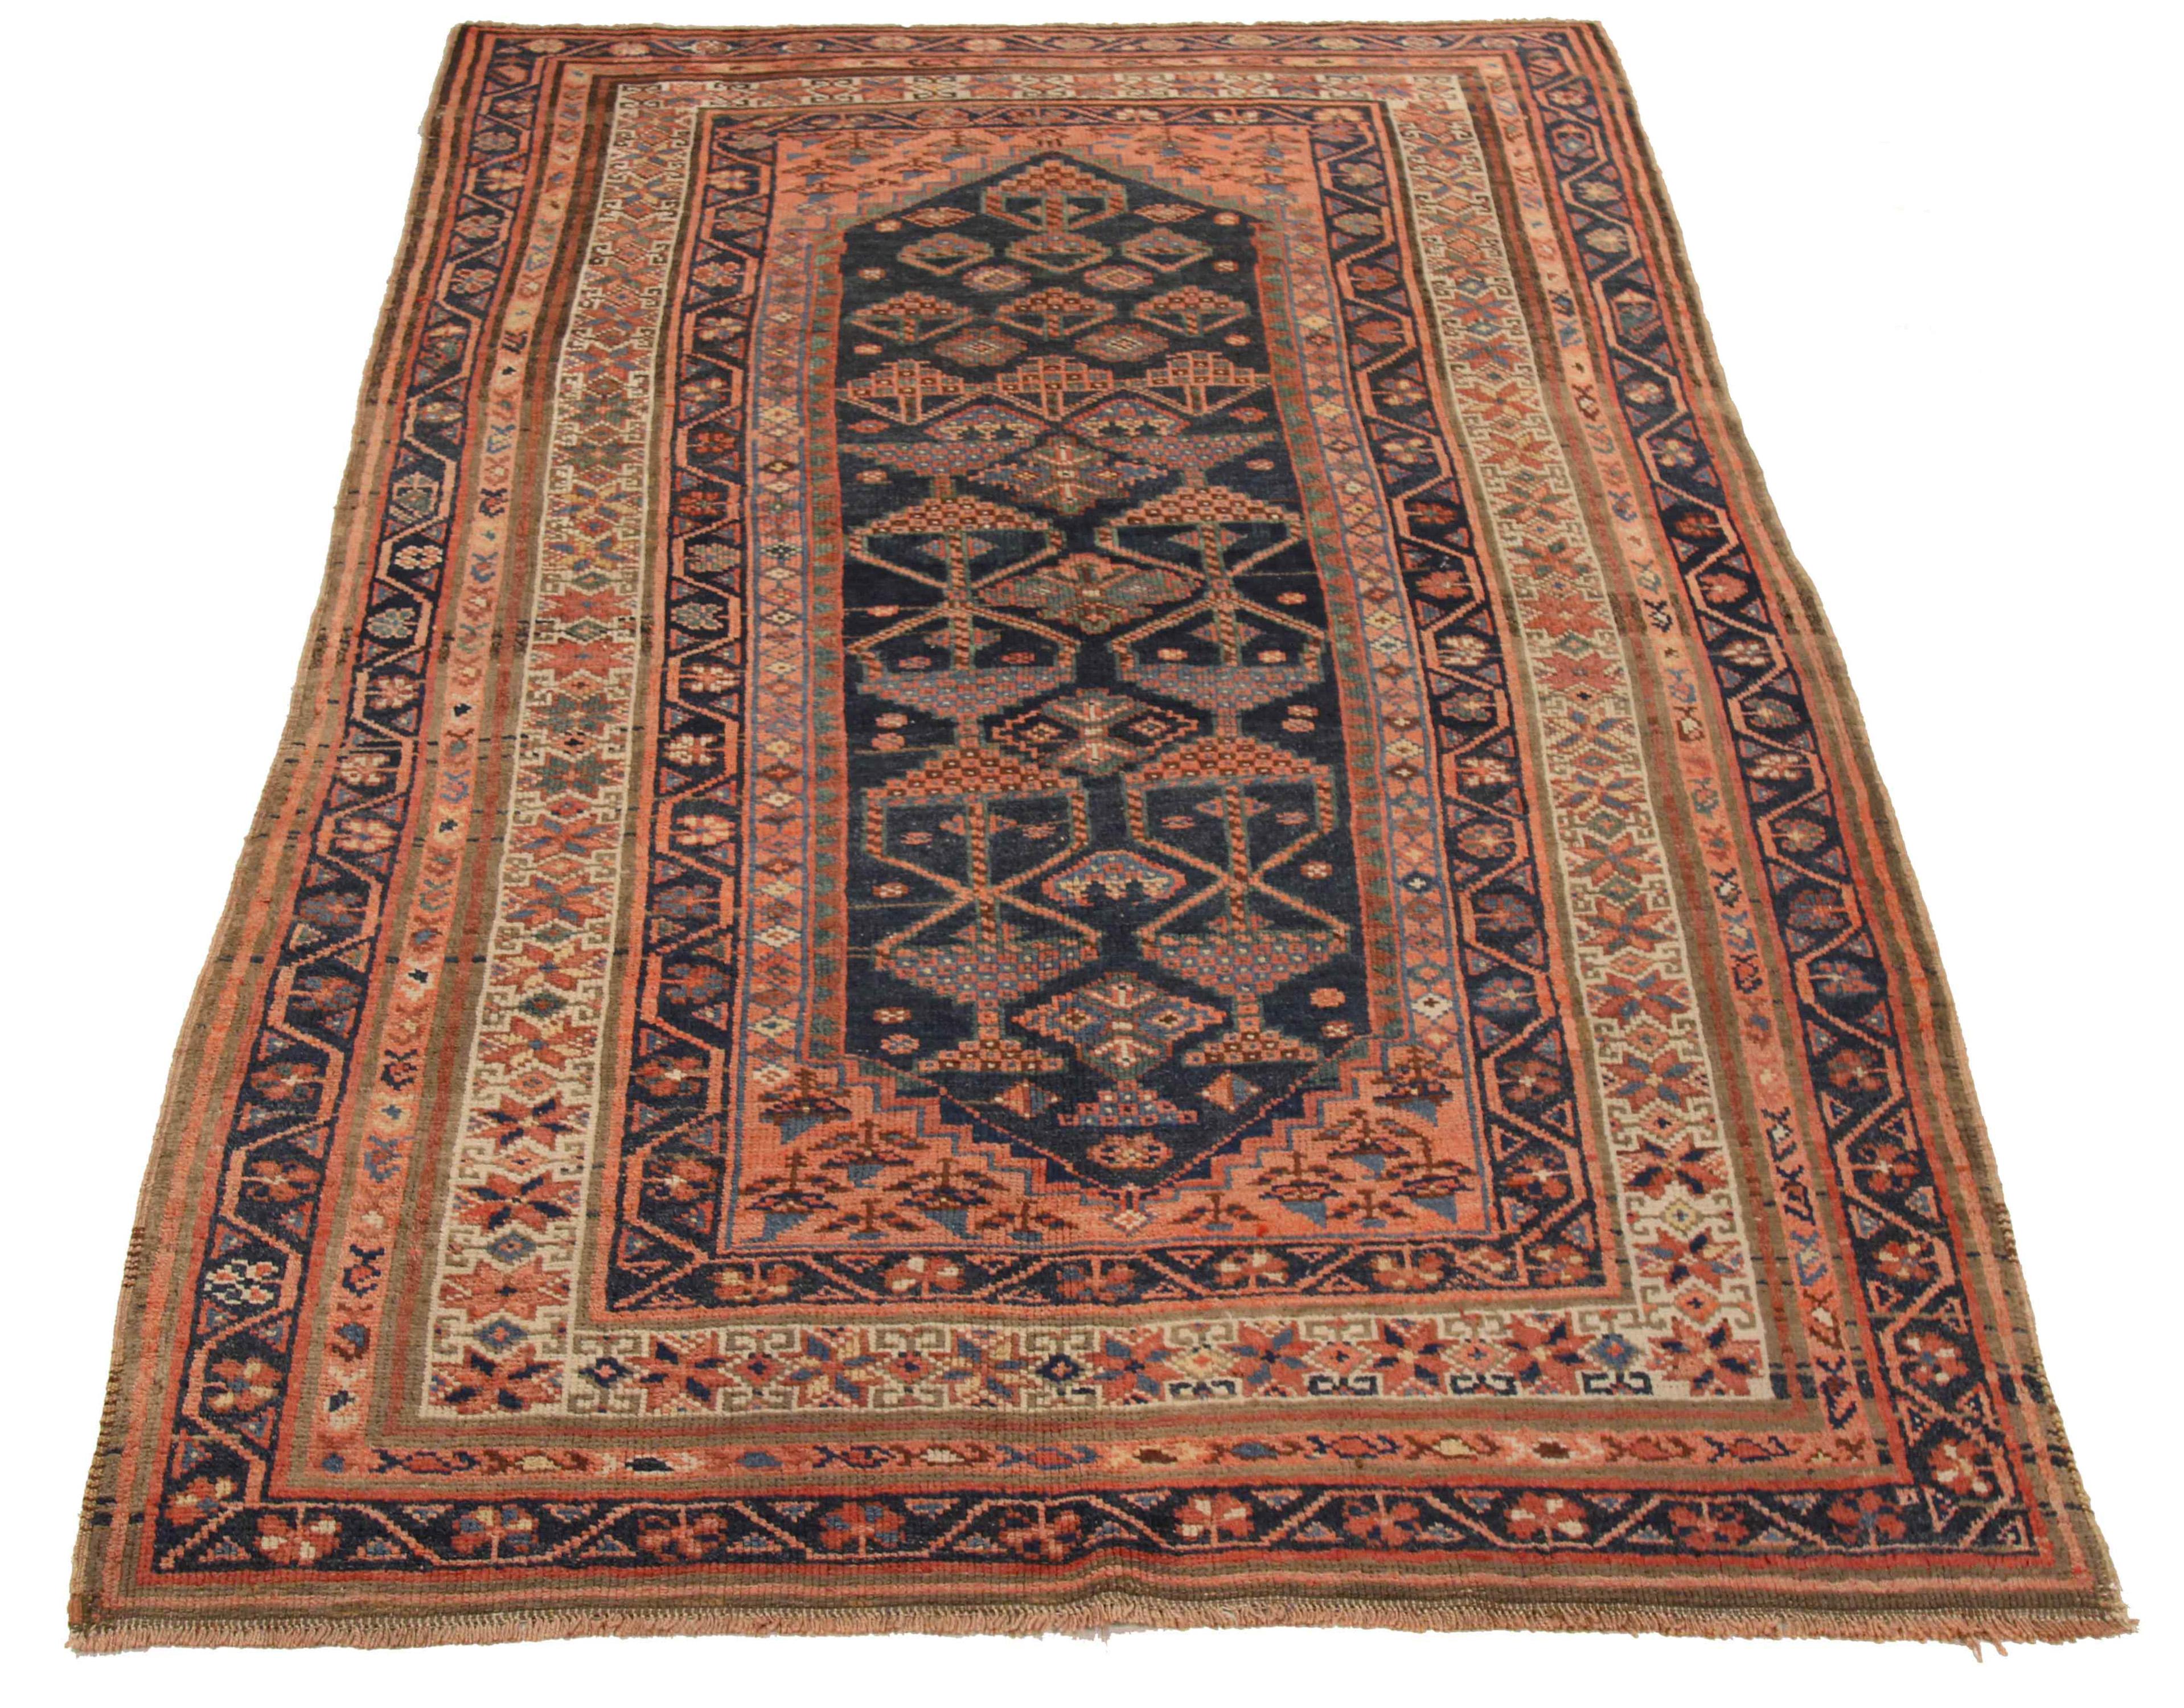 Antique Persian area rug handwoven from the finest sheep’s wool. It’s colored with all-natural vegetable dyes that are safe for humans and pets. It’s a traditional Lori design handwoven by expert artisans. It’s a lovely area rug that can be